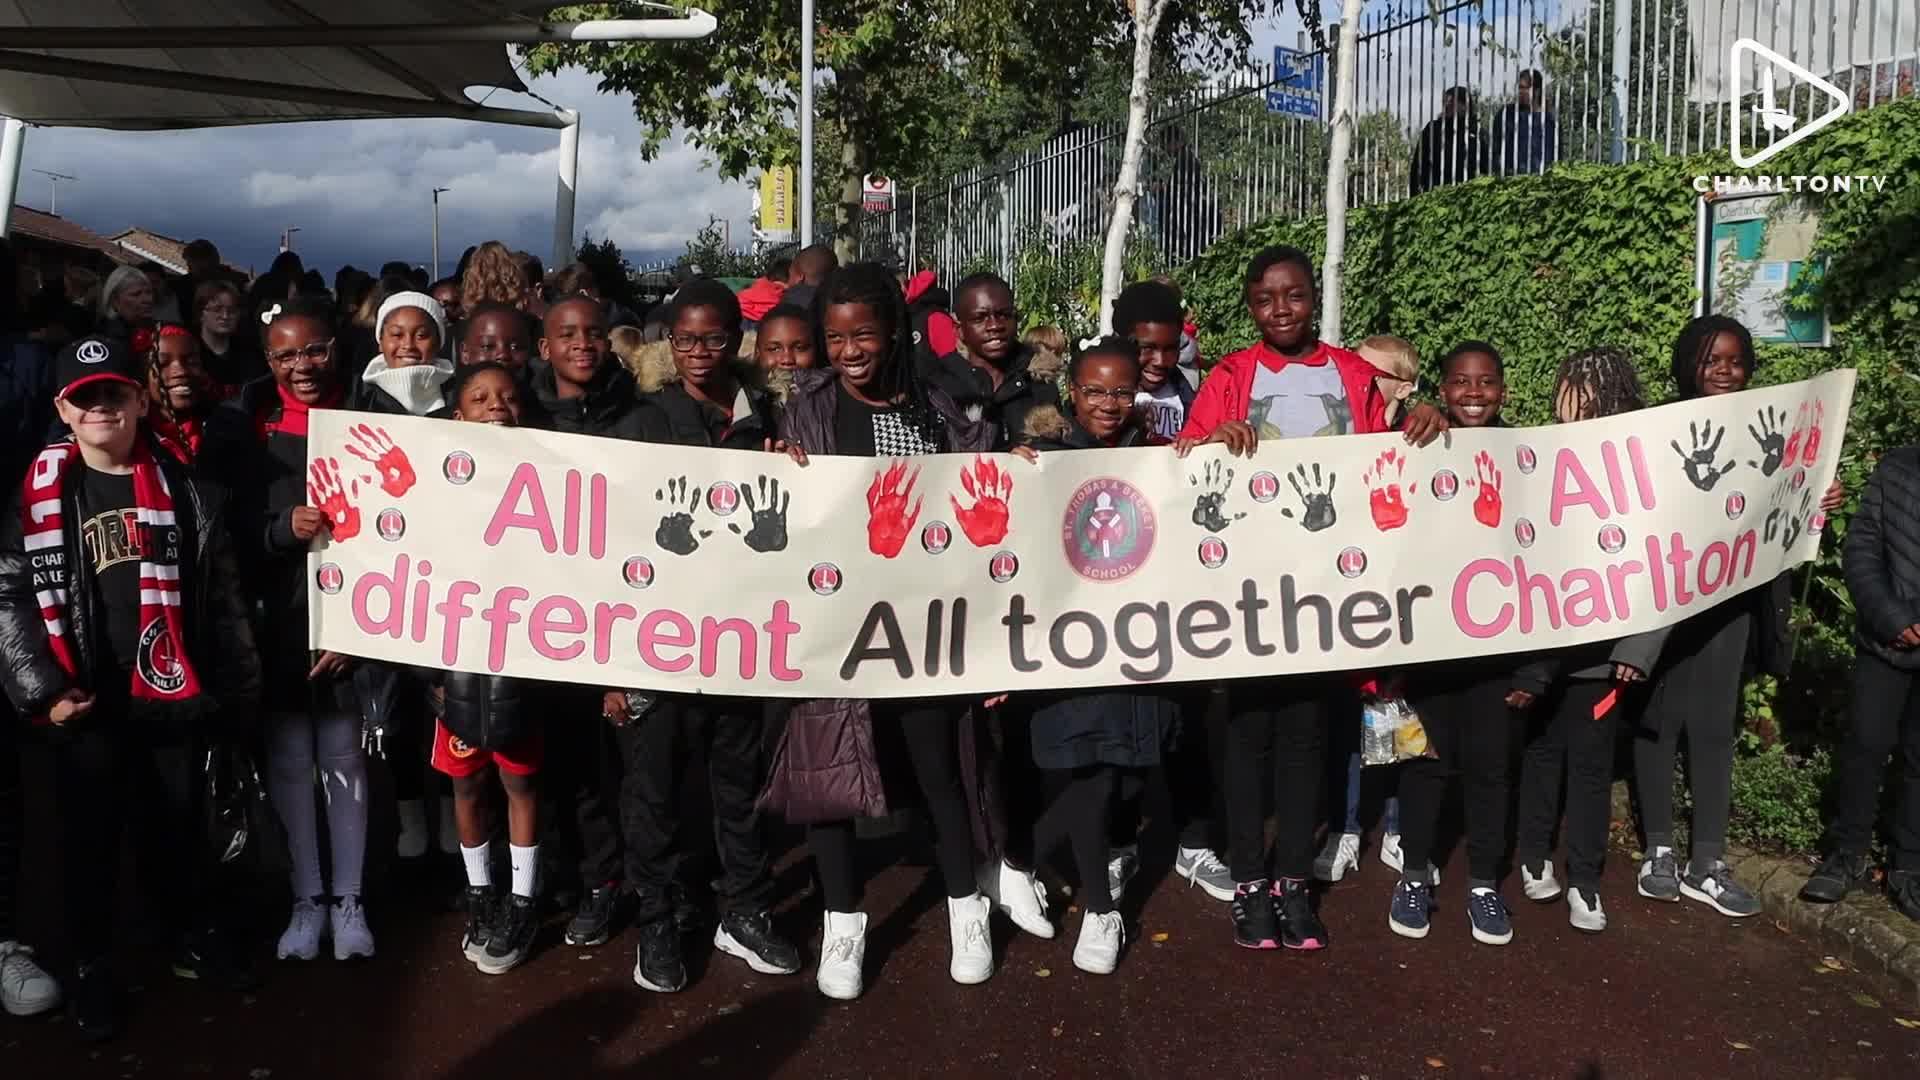 Young supporters holding a banner saying "All different, all together, all Charlton"